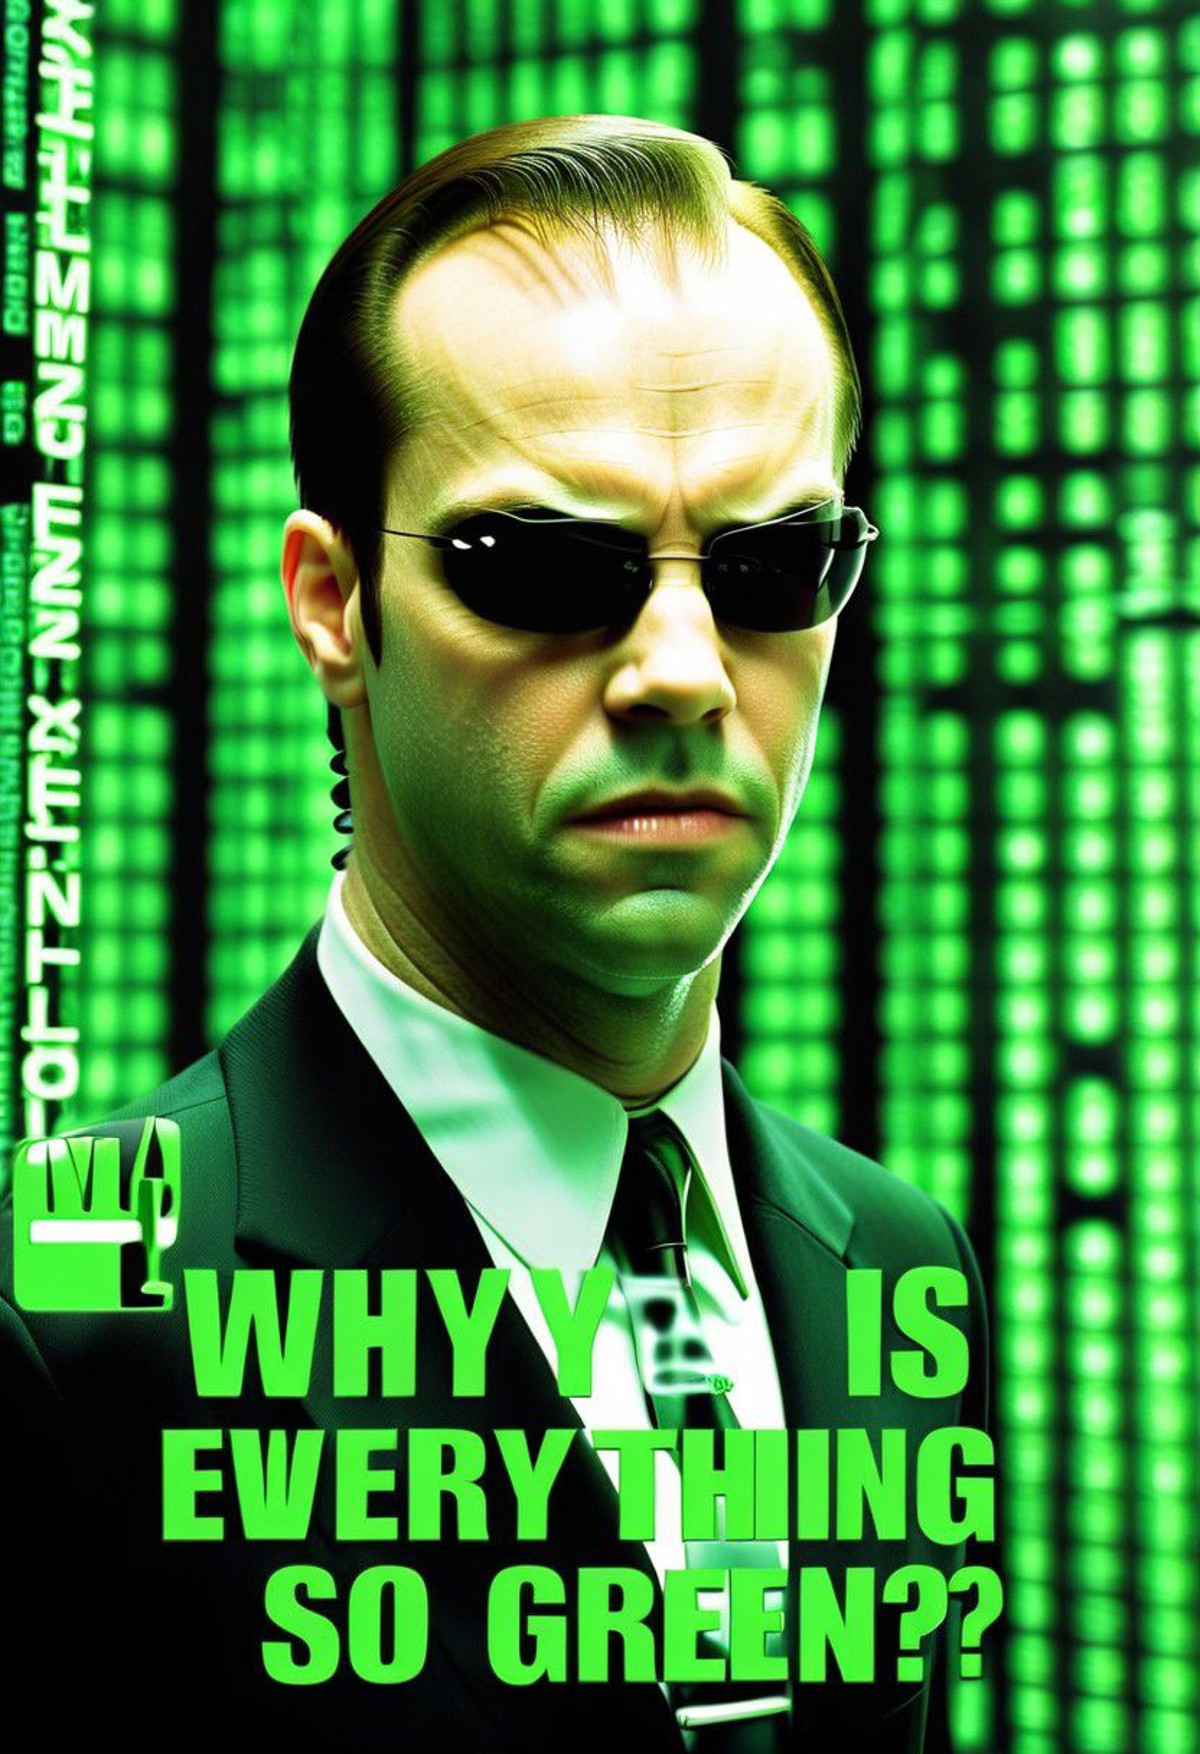 The Matrix Style, agent smith frowning, sign that says "Why_is_everything so_green?", text ,